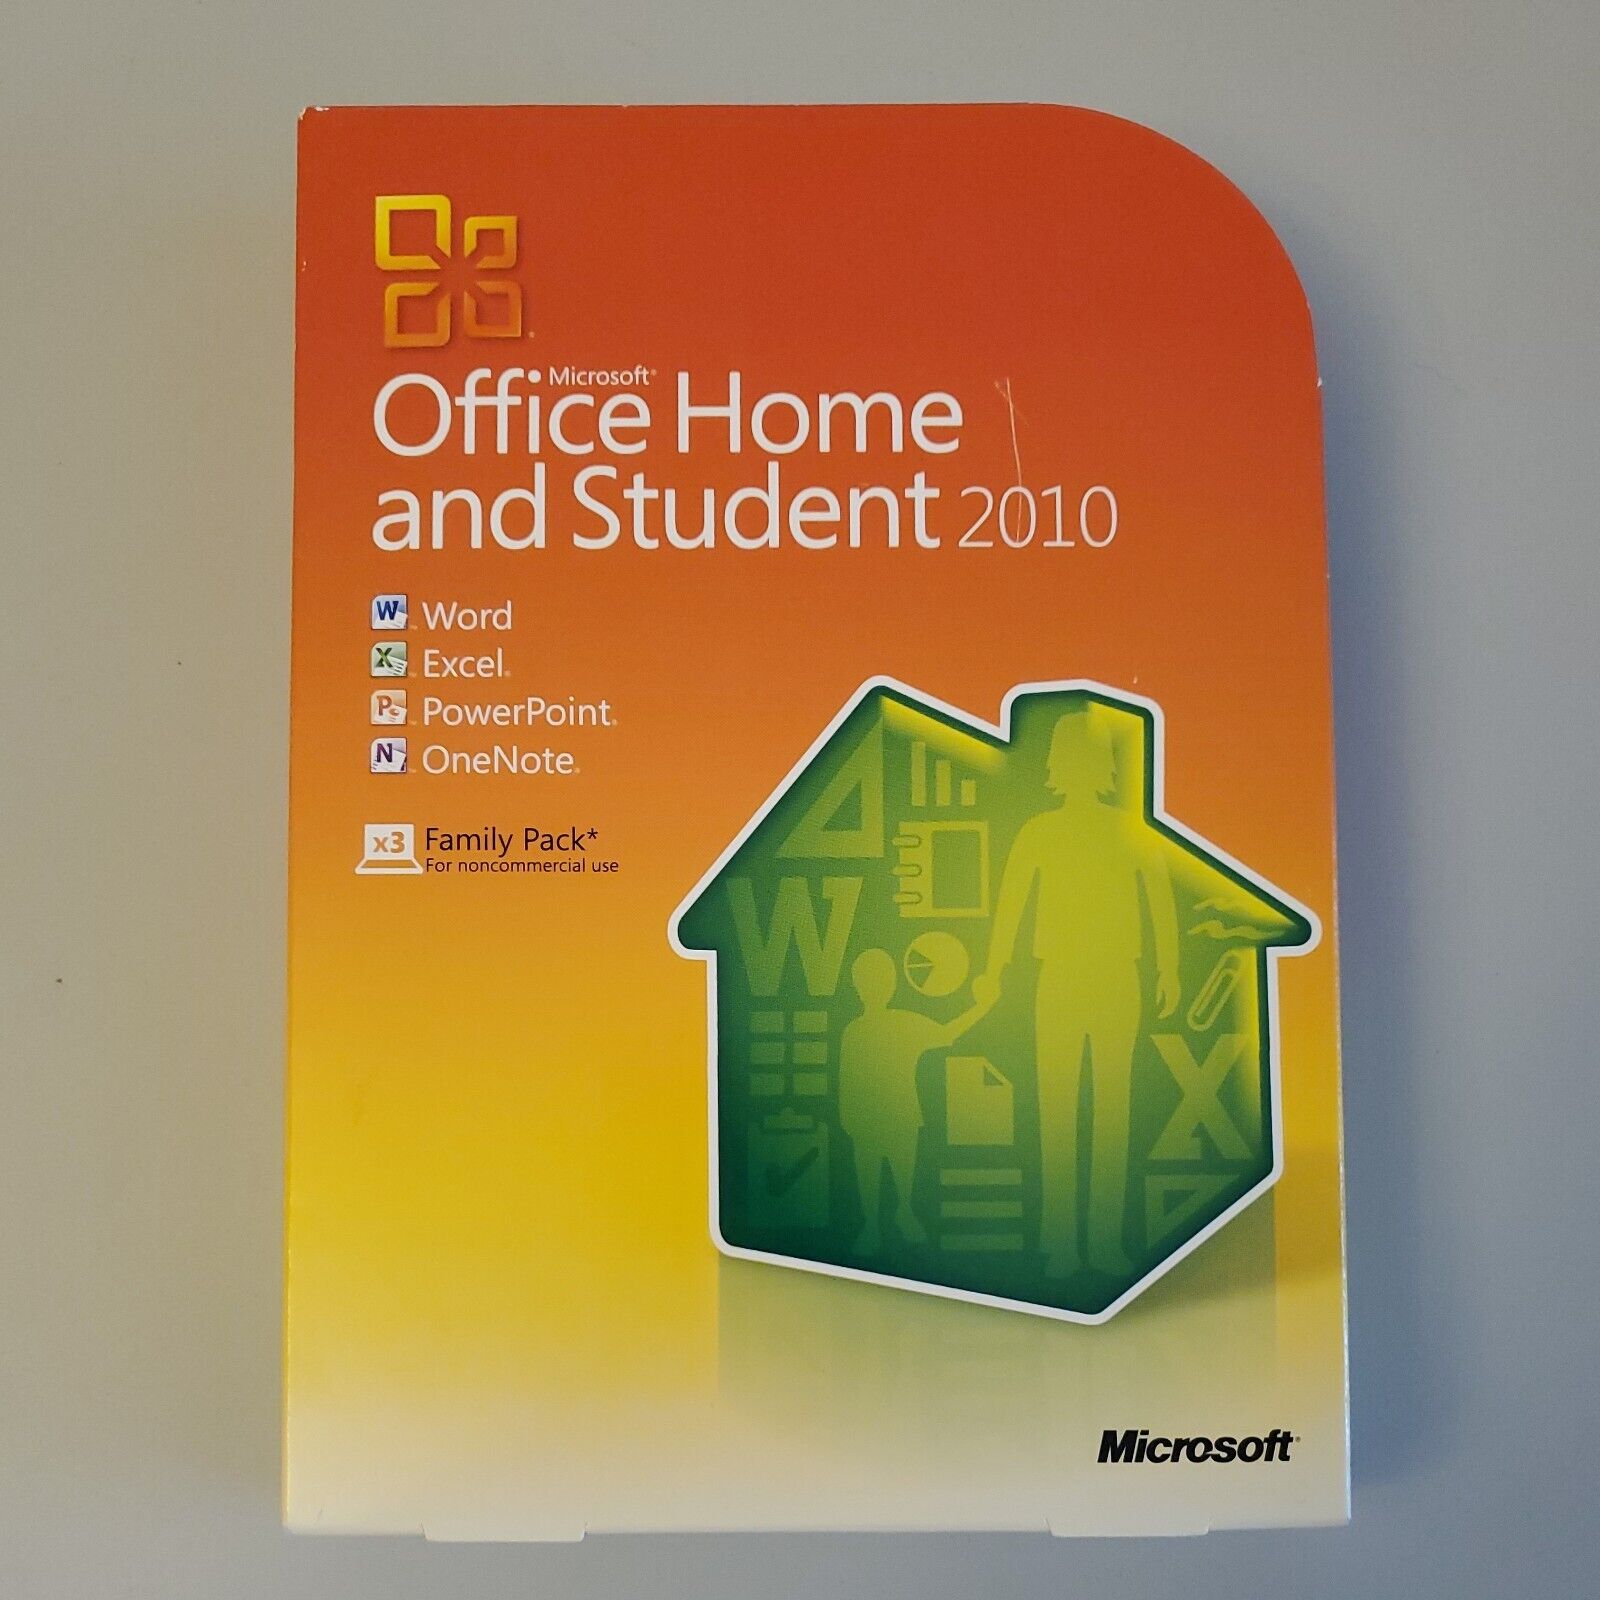 Microsoft Office Home and Student 2010 Full Retail Version - 3 User Family Pack